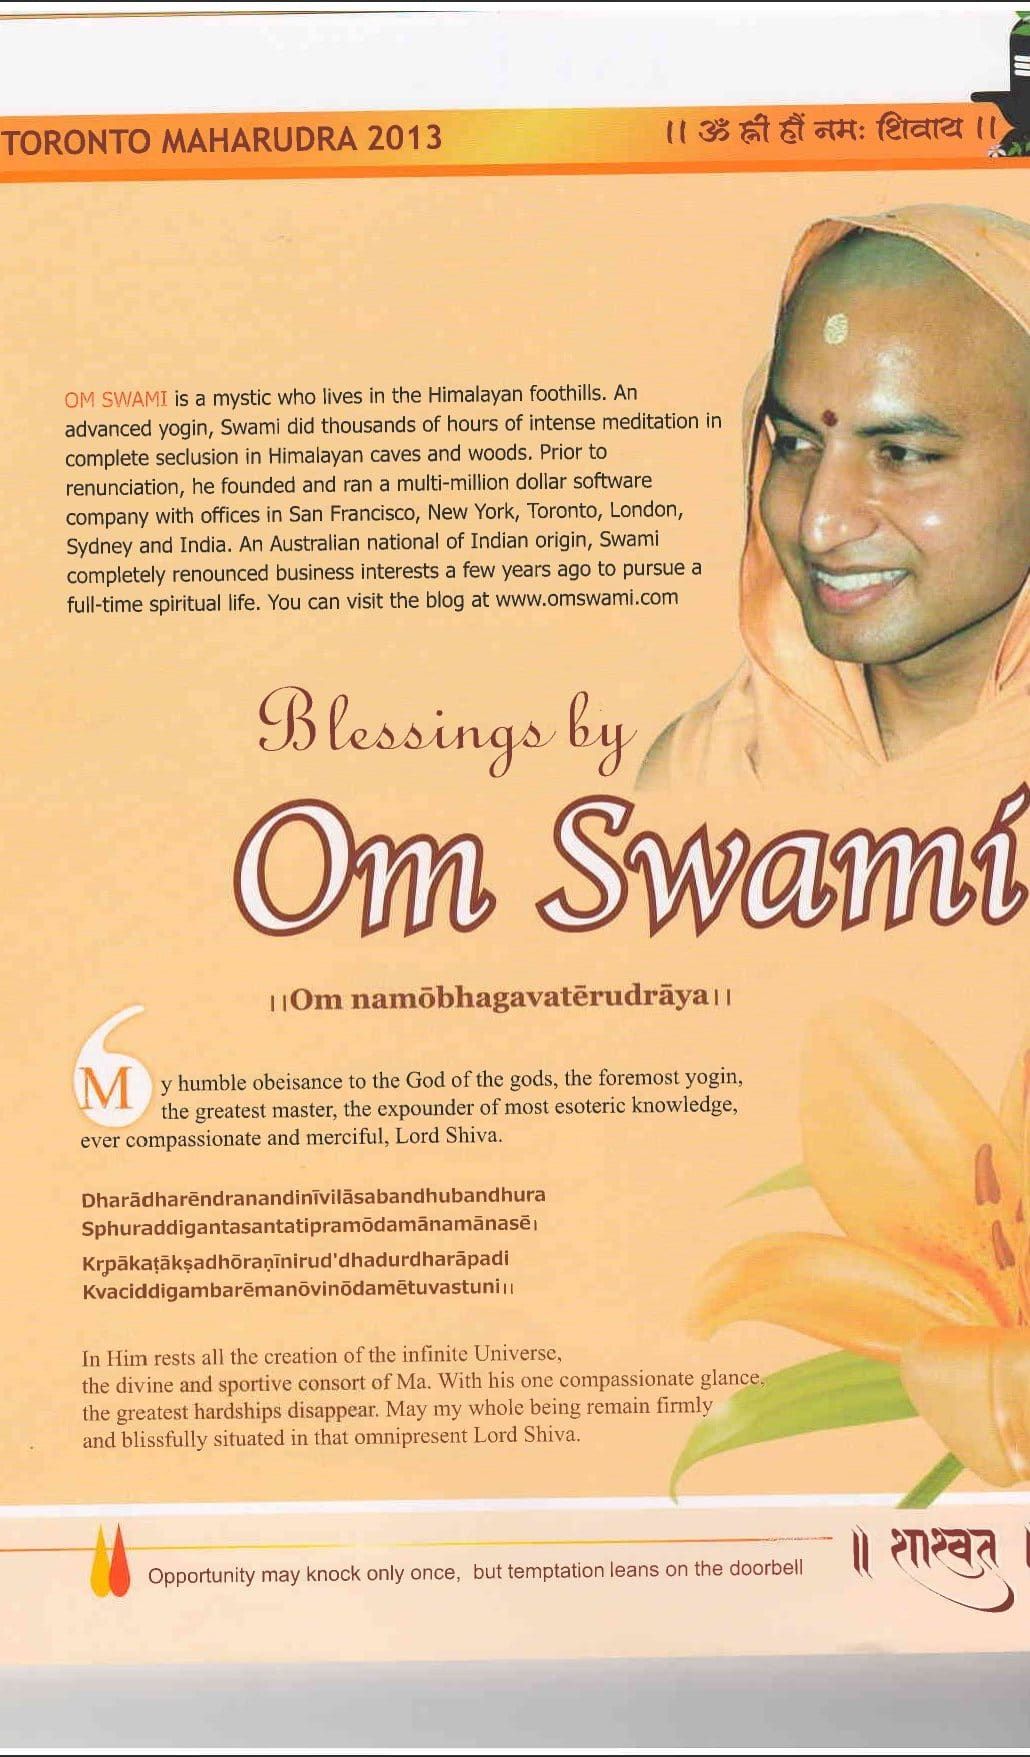 Message by om swami